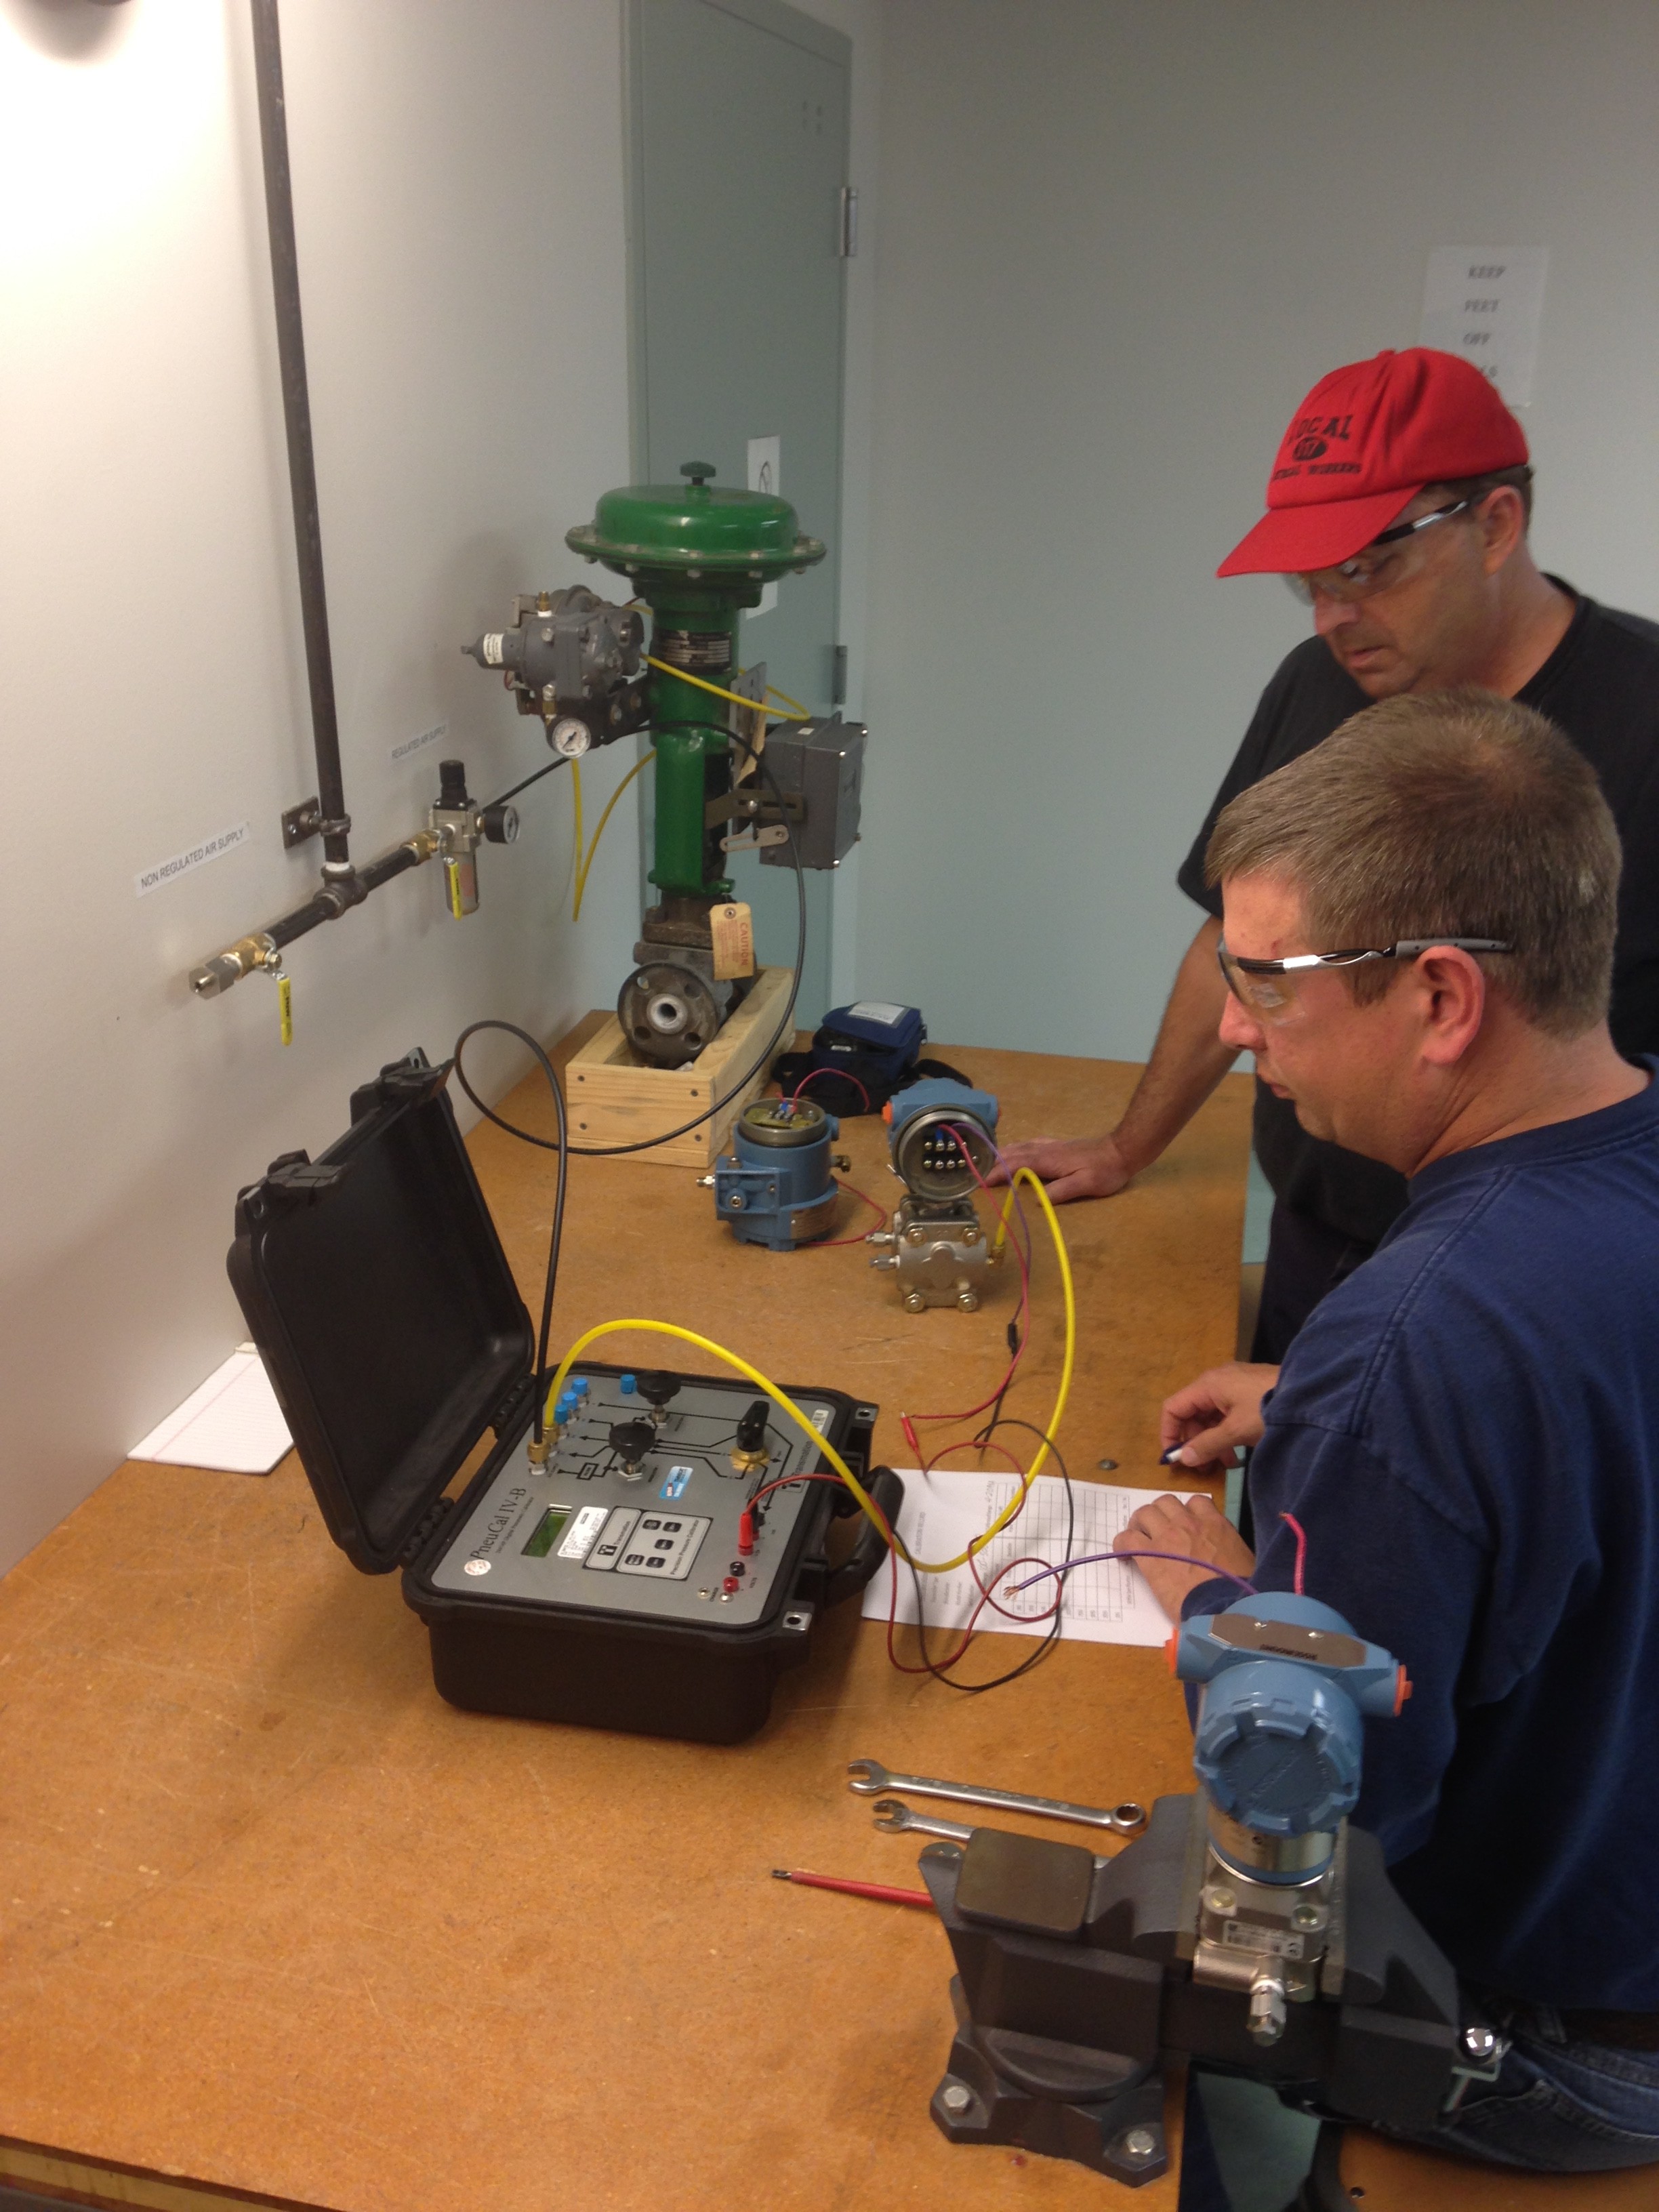 Electrical apprentices receiving training and instruction